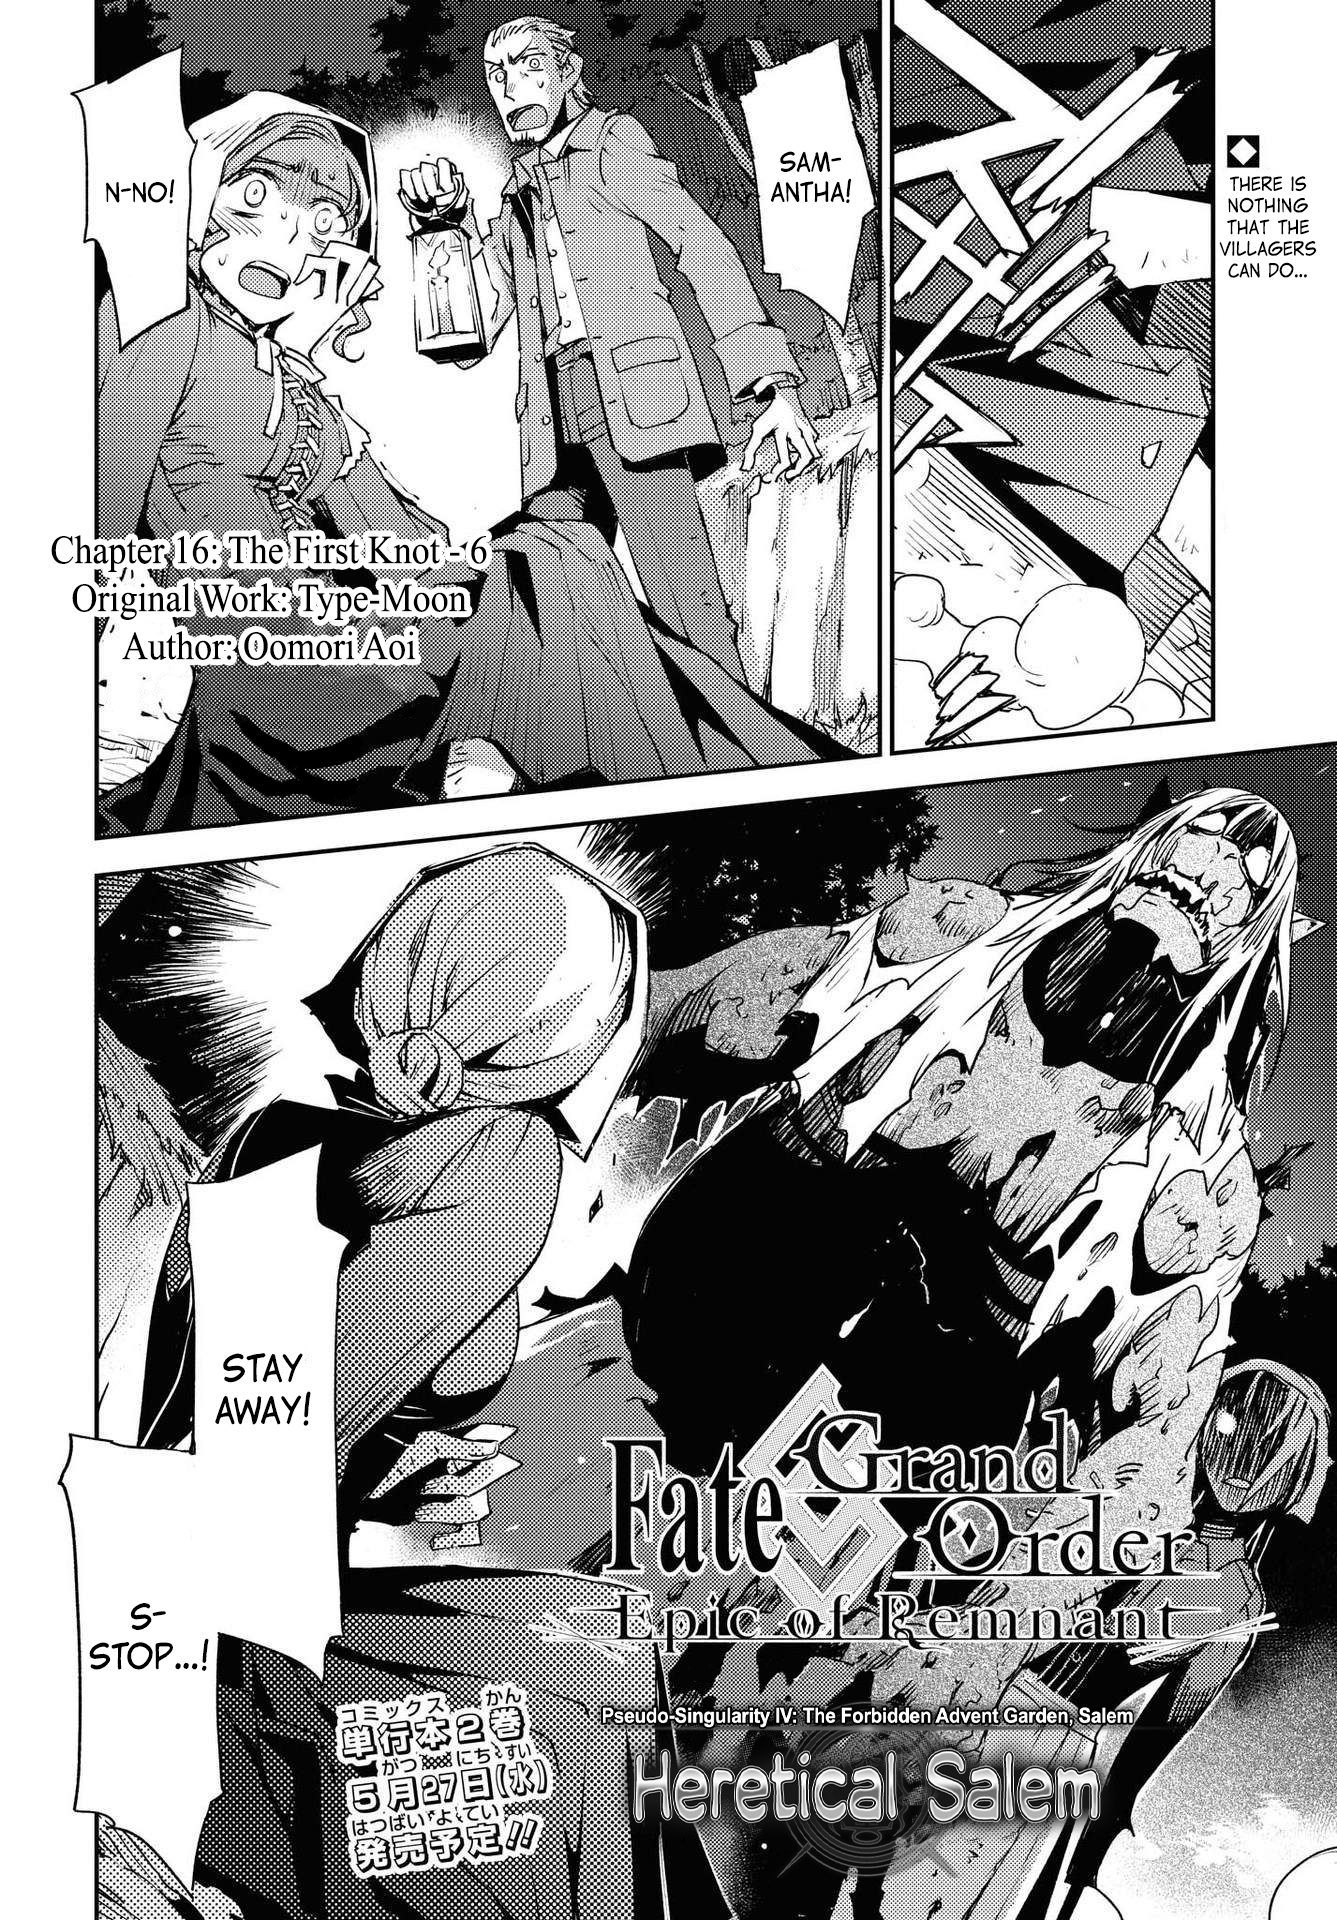 Fate/grand Order: Epic Of Remnant: Pseudo-Singularity Iv: The Forbidden Advent Garden, Salem - Heretical Salem Chapter 16: The First Knot - 6 - Picture 2